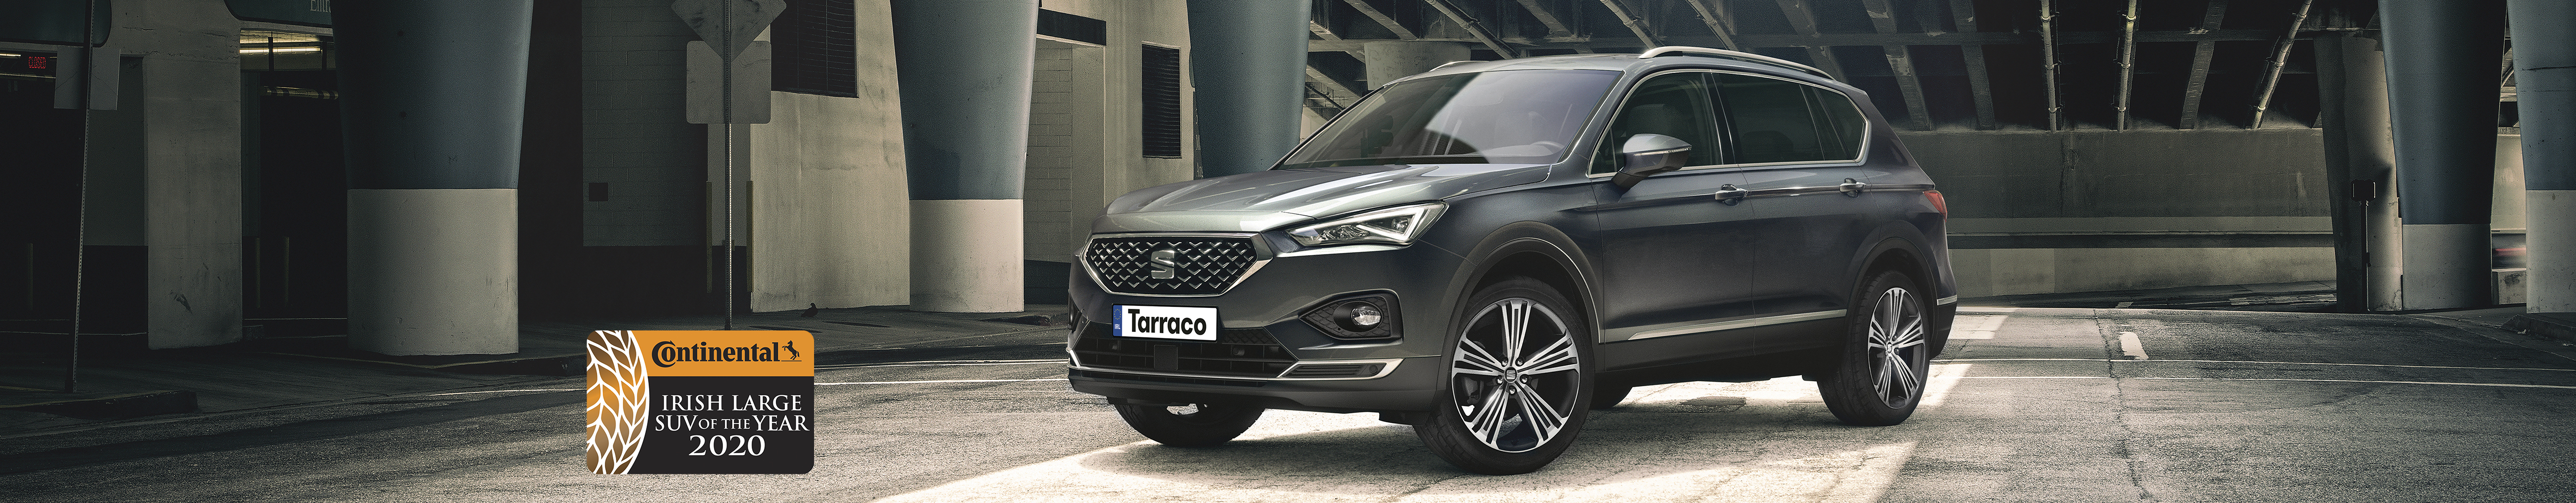 SEAT Tarraco 2021 SUV 7 seater parked outside building beauty shot